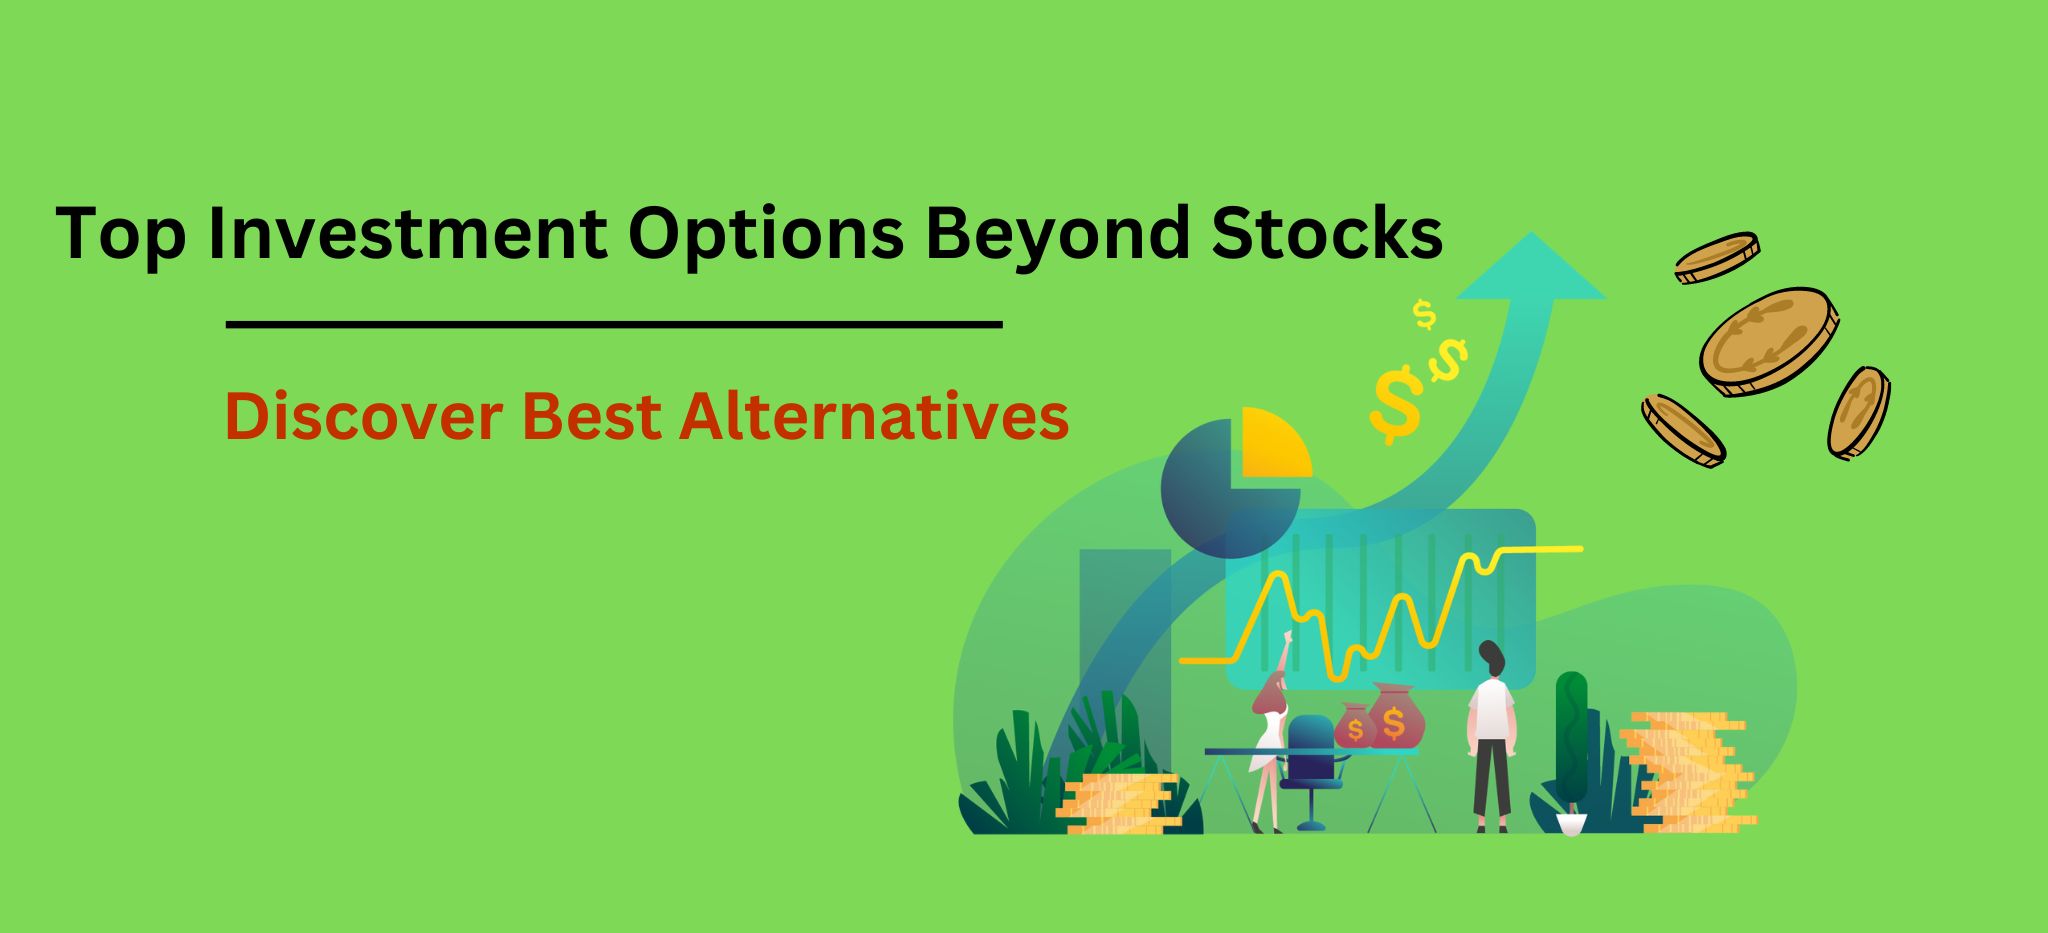 Top Investment Options